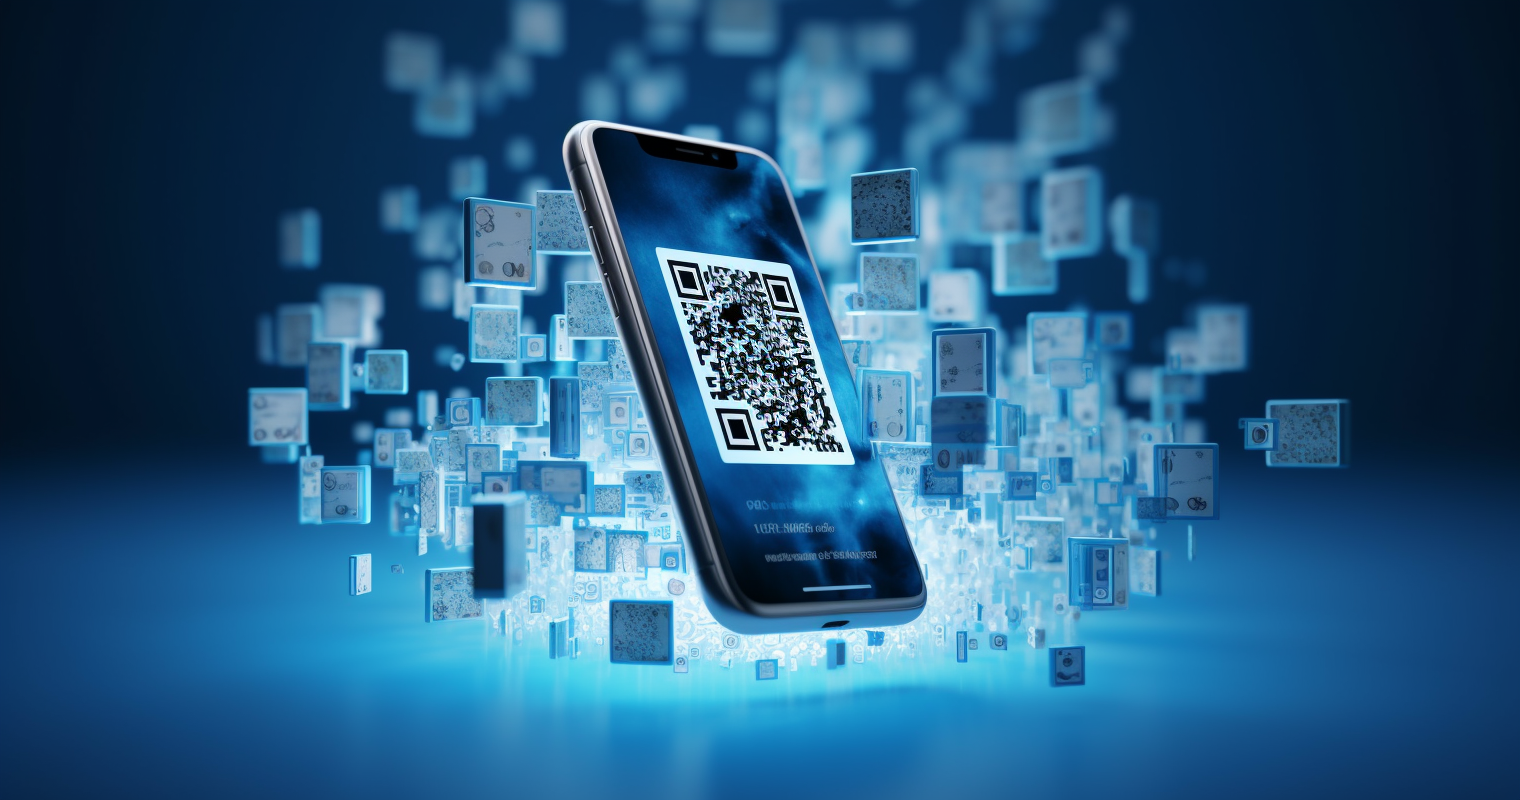 What is a QR code?